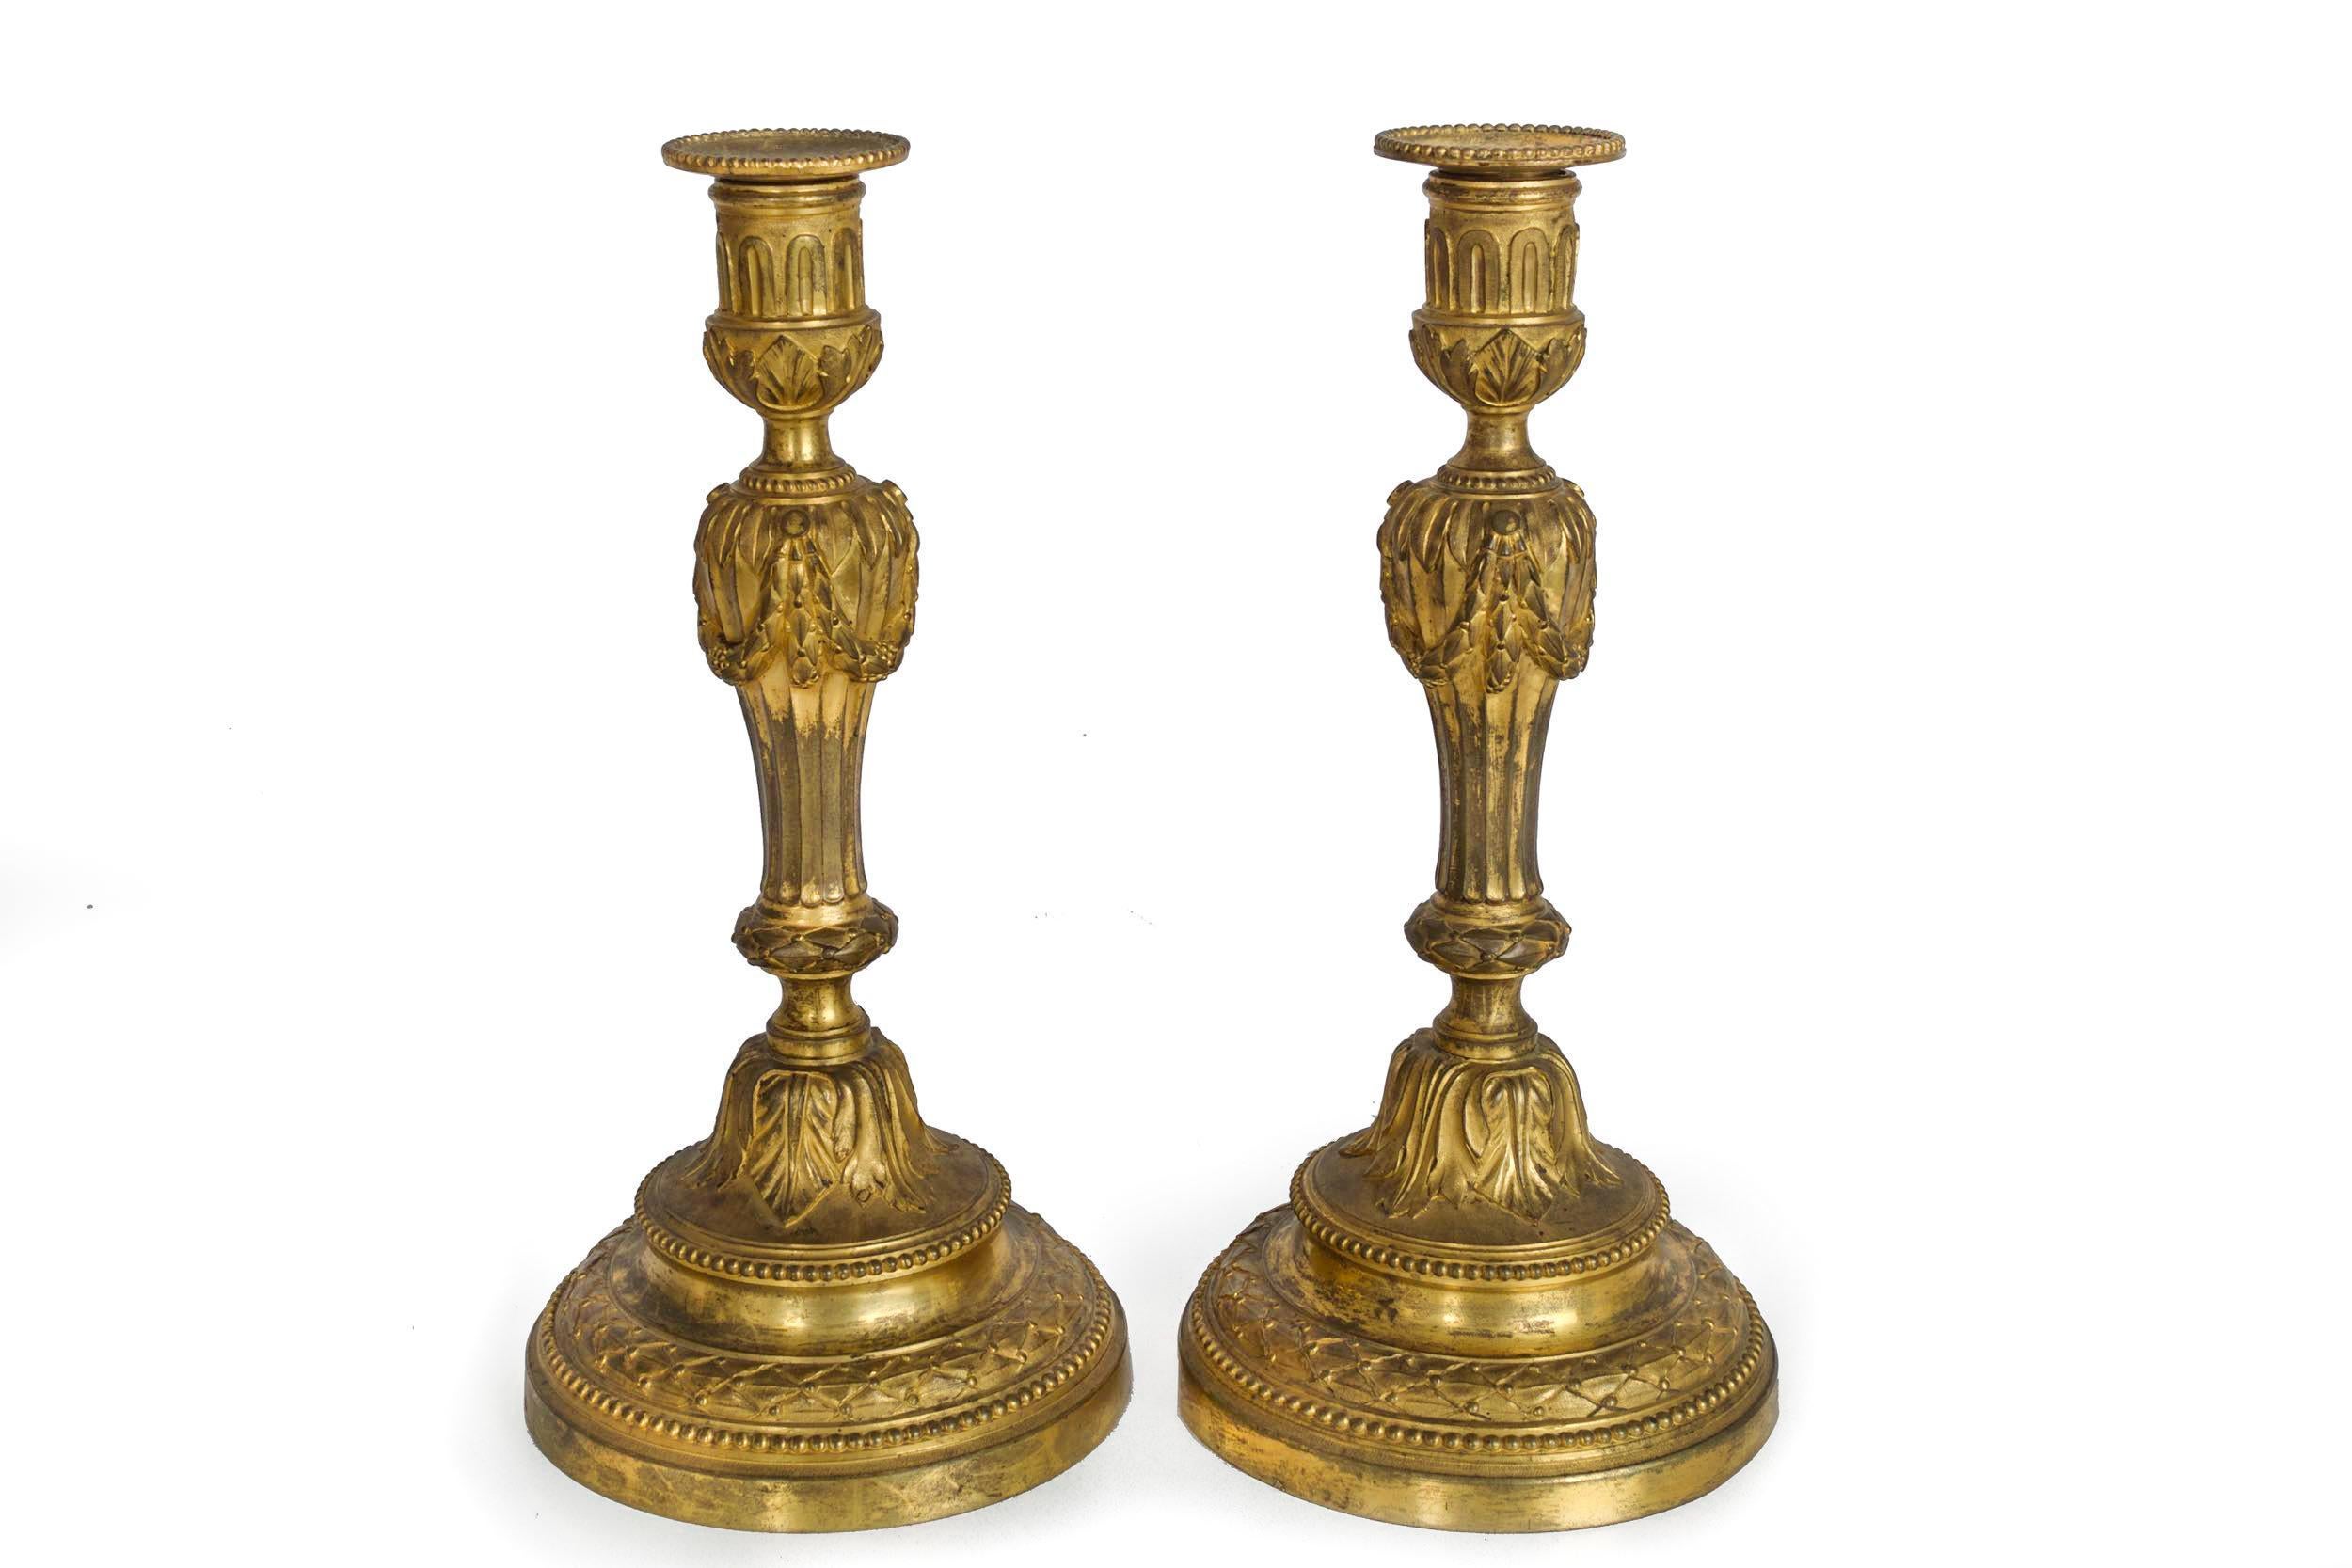 Rare Pair of Louis XVI Period Ormolu Candlesticks, France, circa 1770 In Good Condition For Sale In Shippensburg, PA